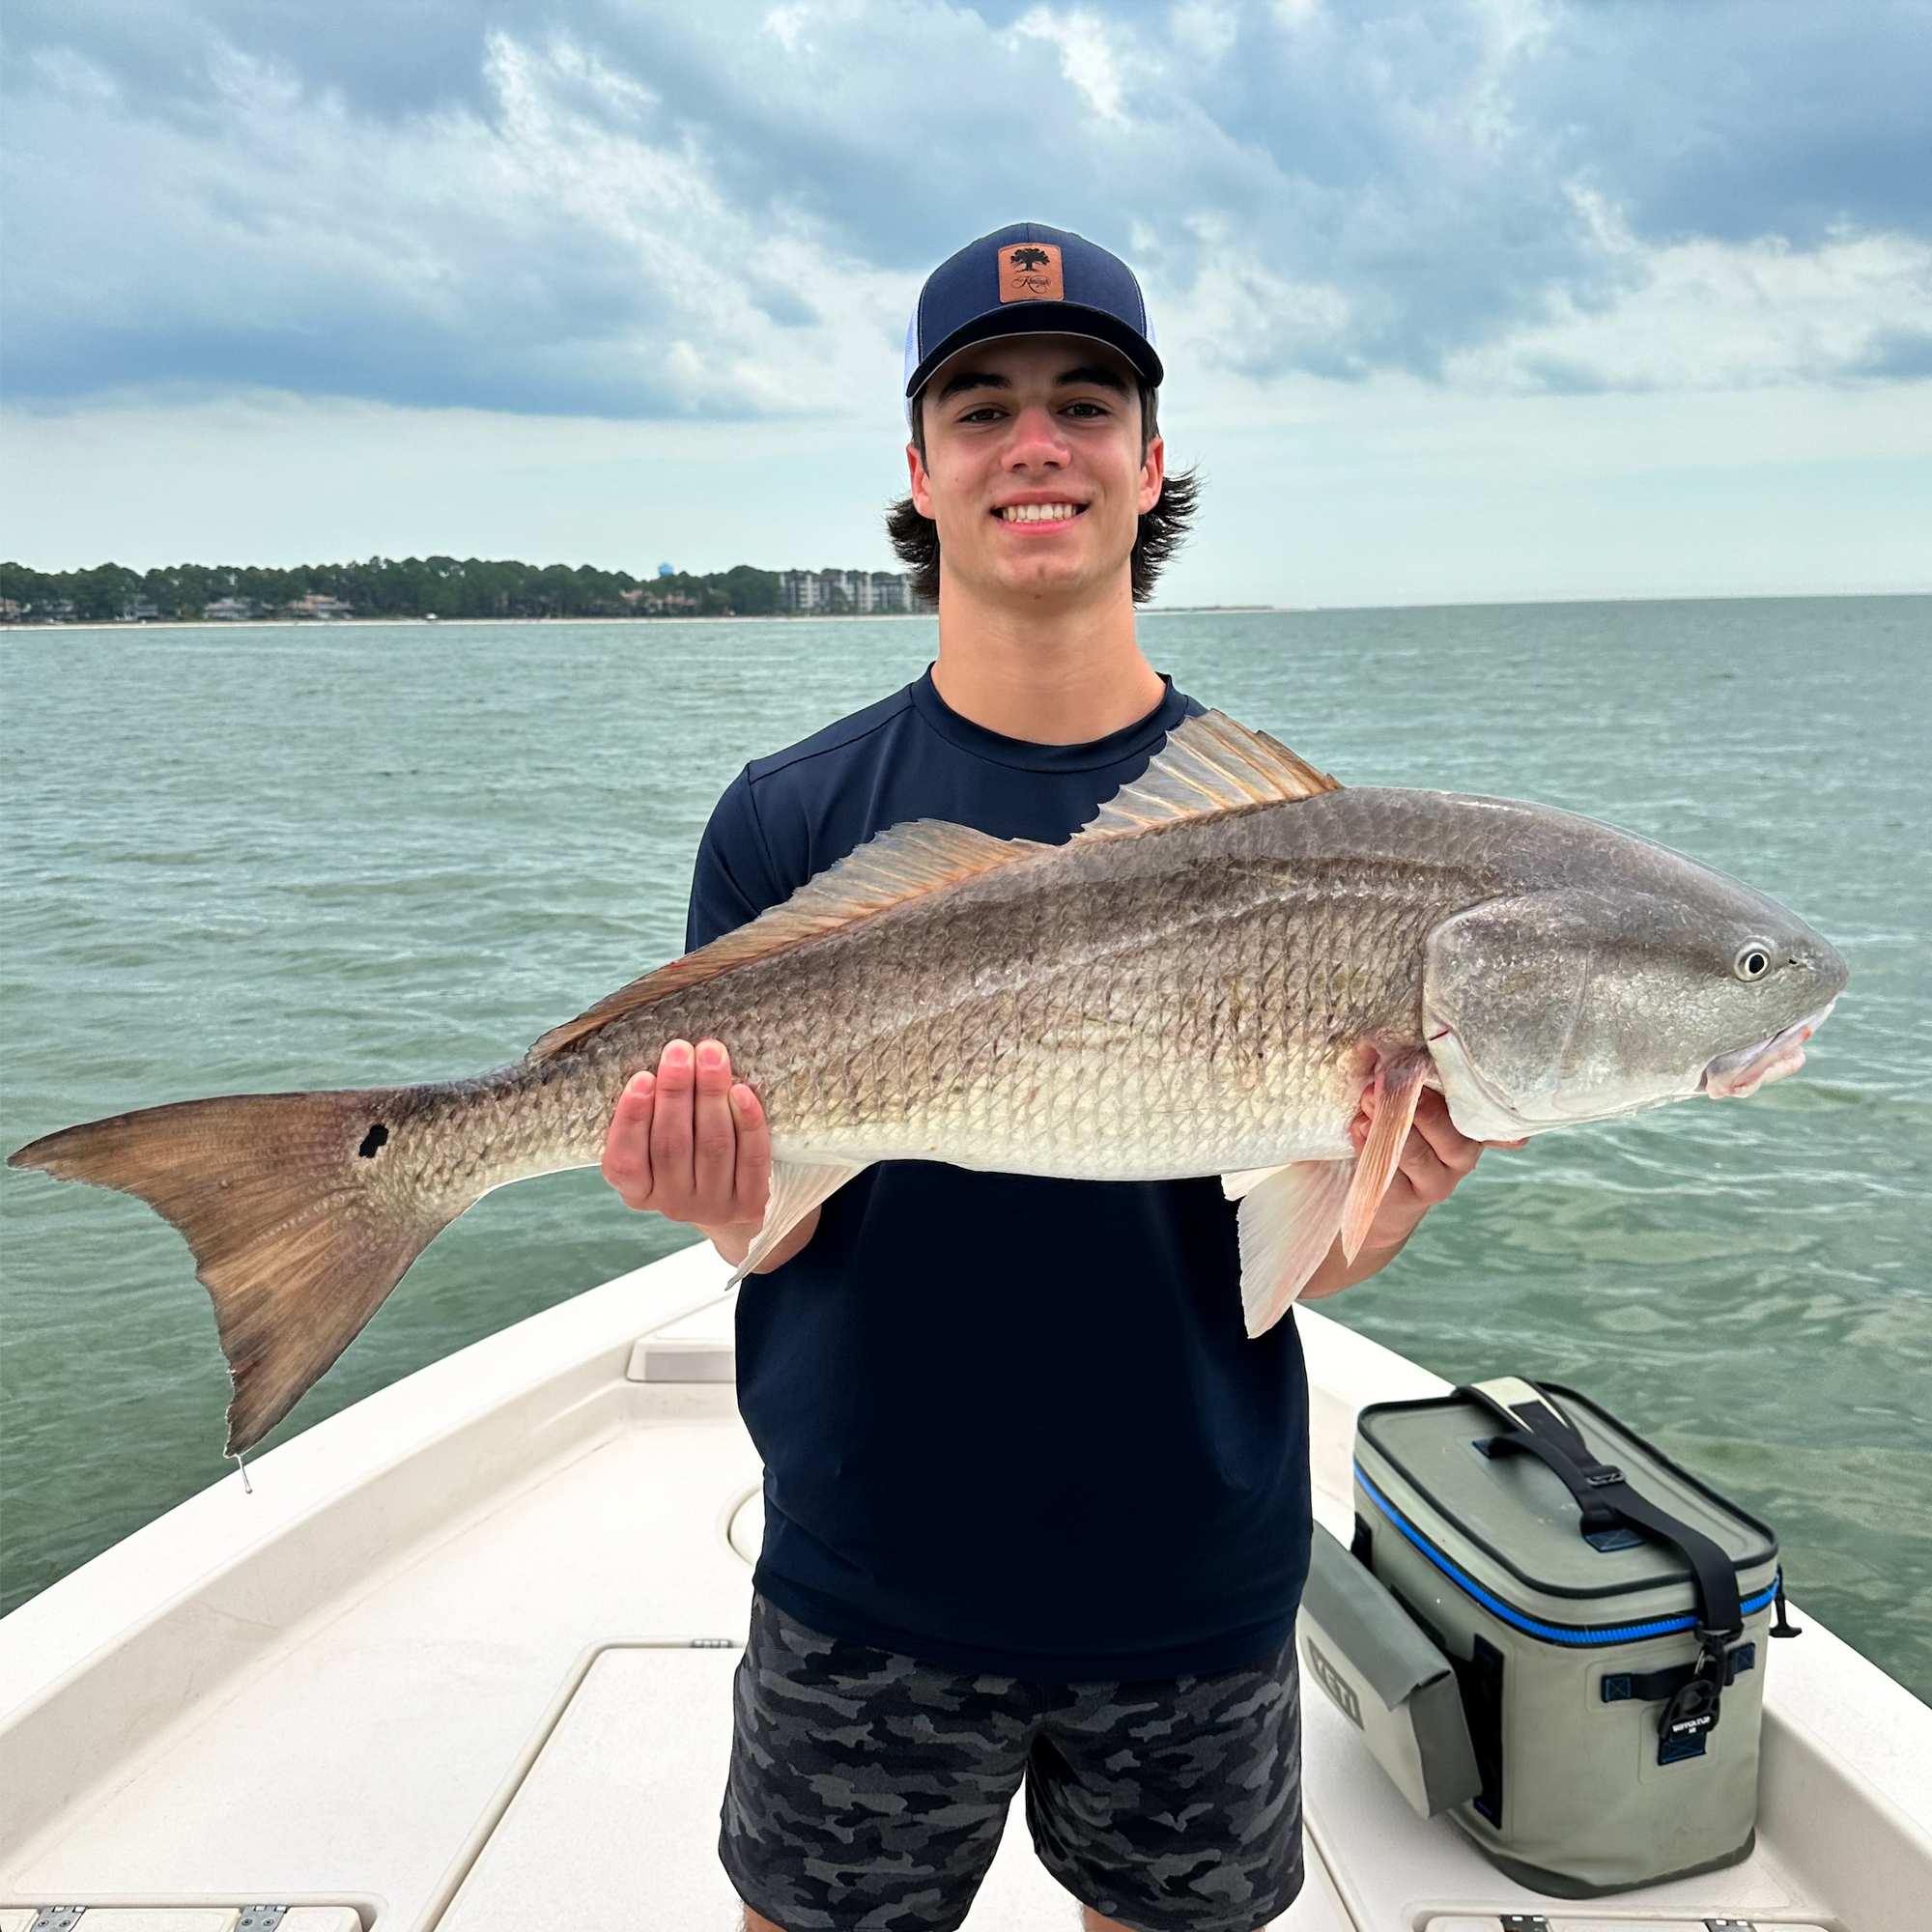 Highlight reel from the last few days! Lots of variety of species inshore and so nice to see some sharks and big bull redfish moving in nearshore! 🔥